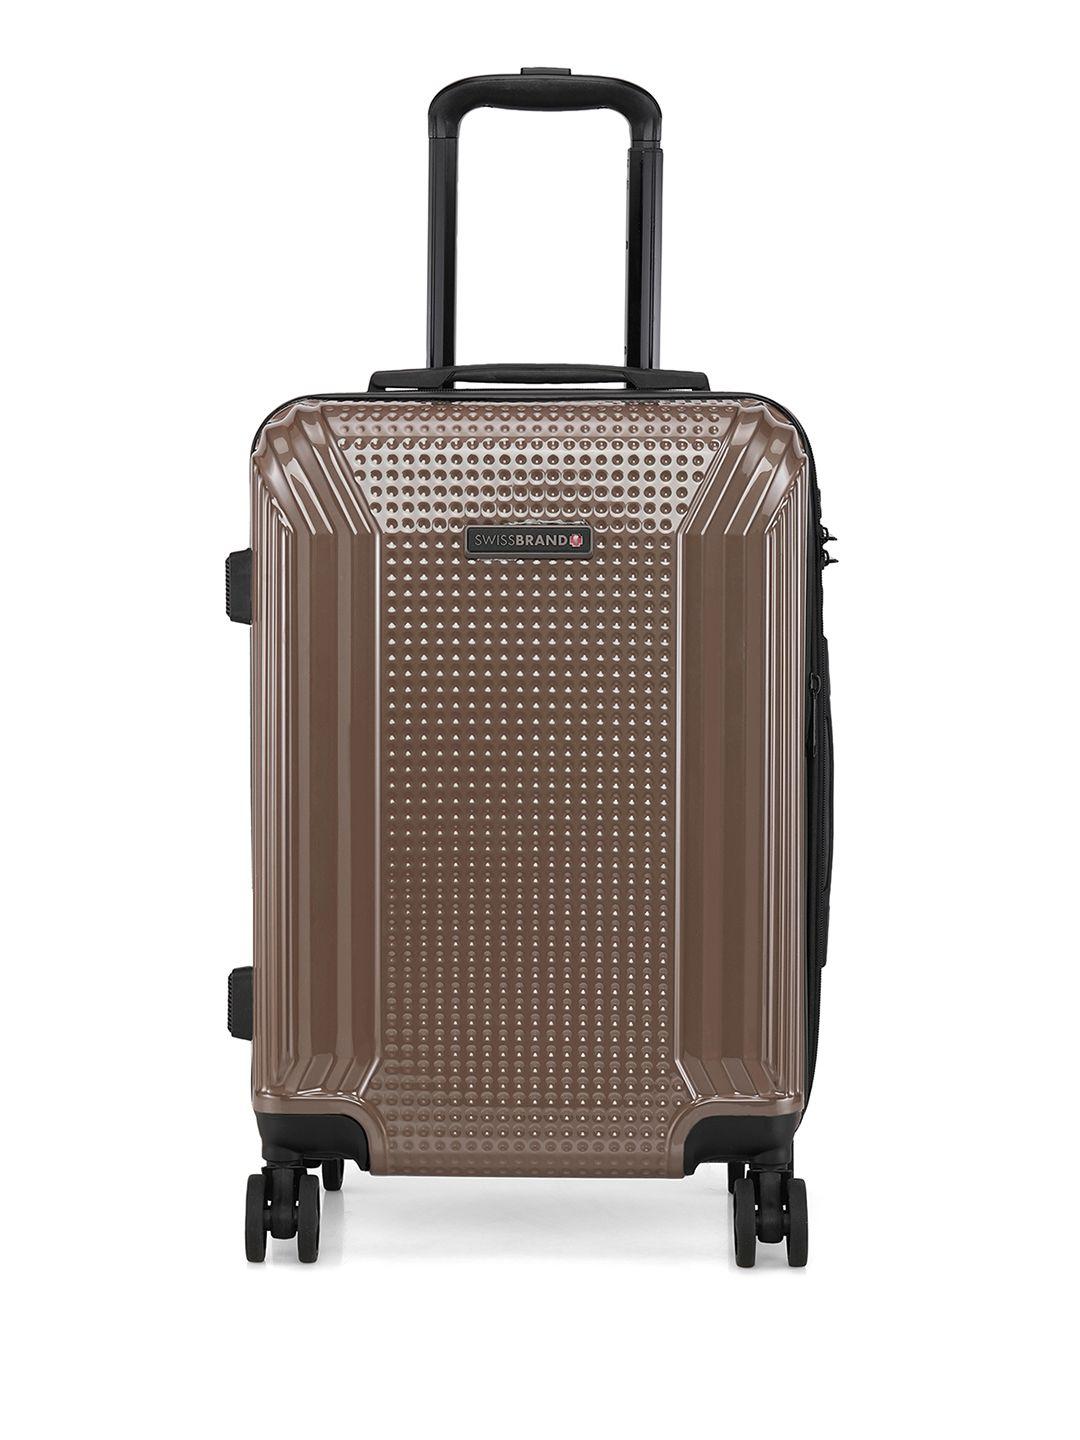 swiss brand coffee brown textured vernier 360-degree rotation hard-sided cabin trolley suitcase